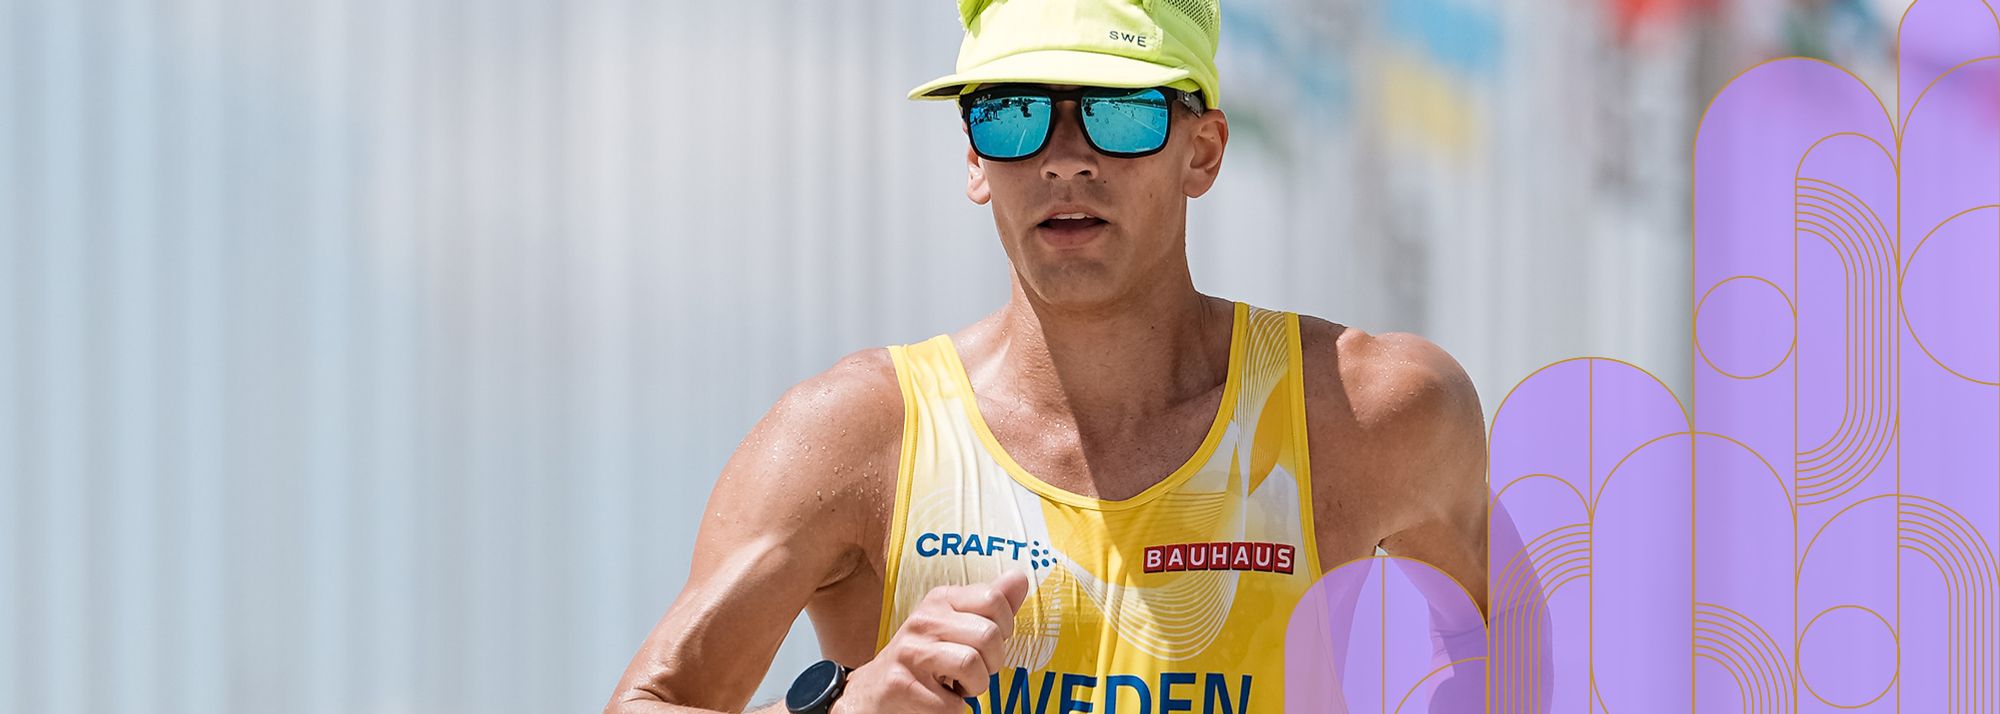 Swedish race walker Perseus Karlstrom recounts the journey that has got him to this point in his career